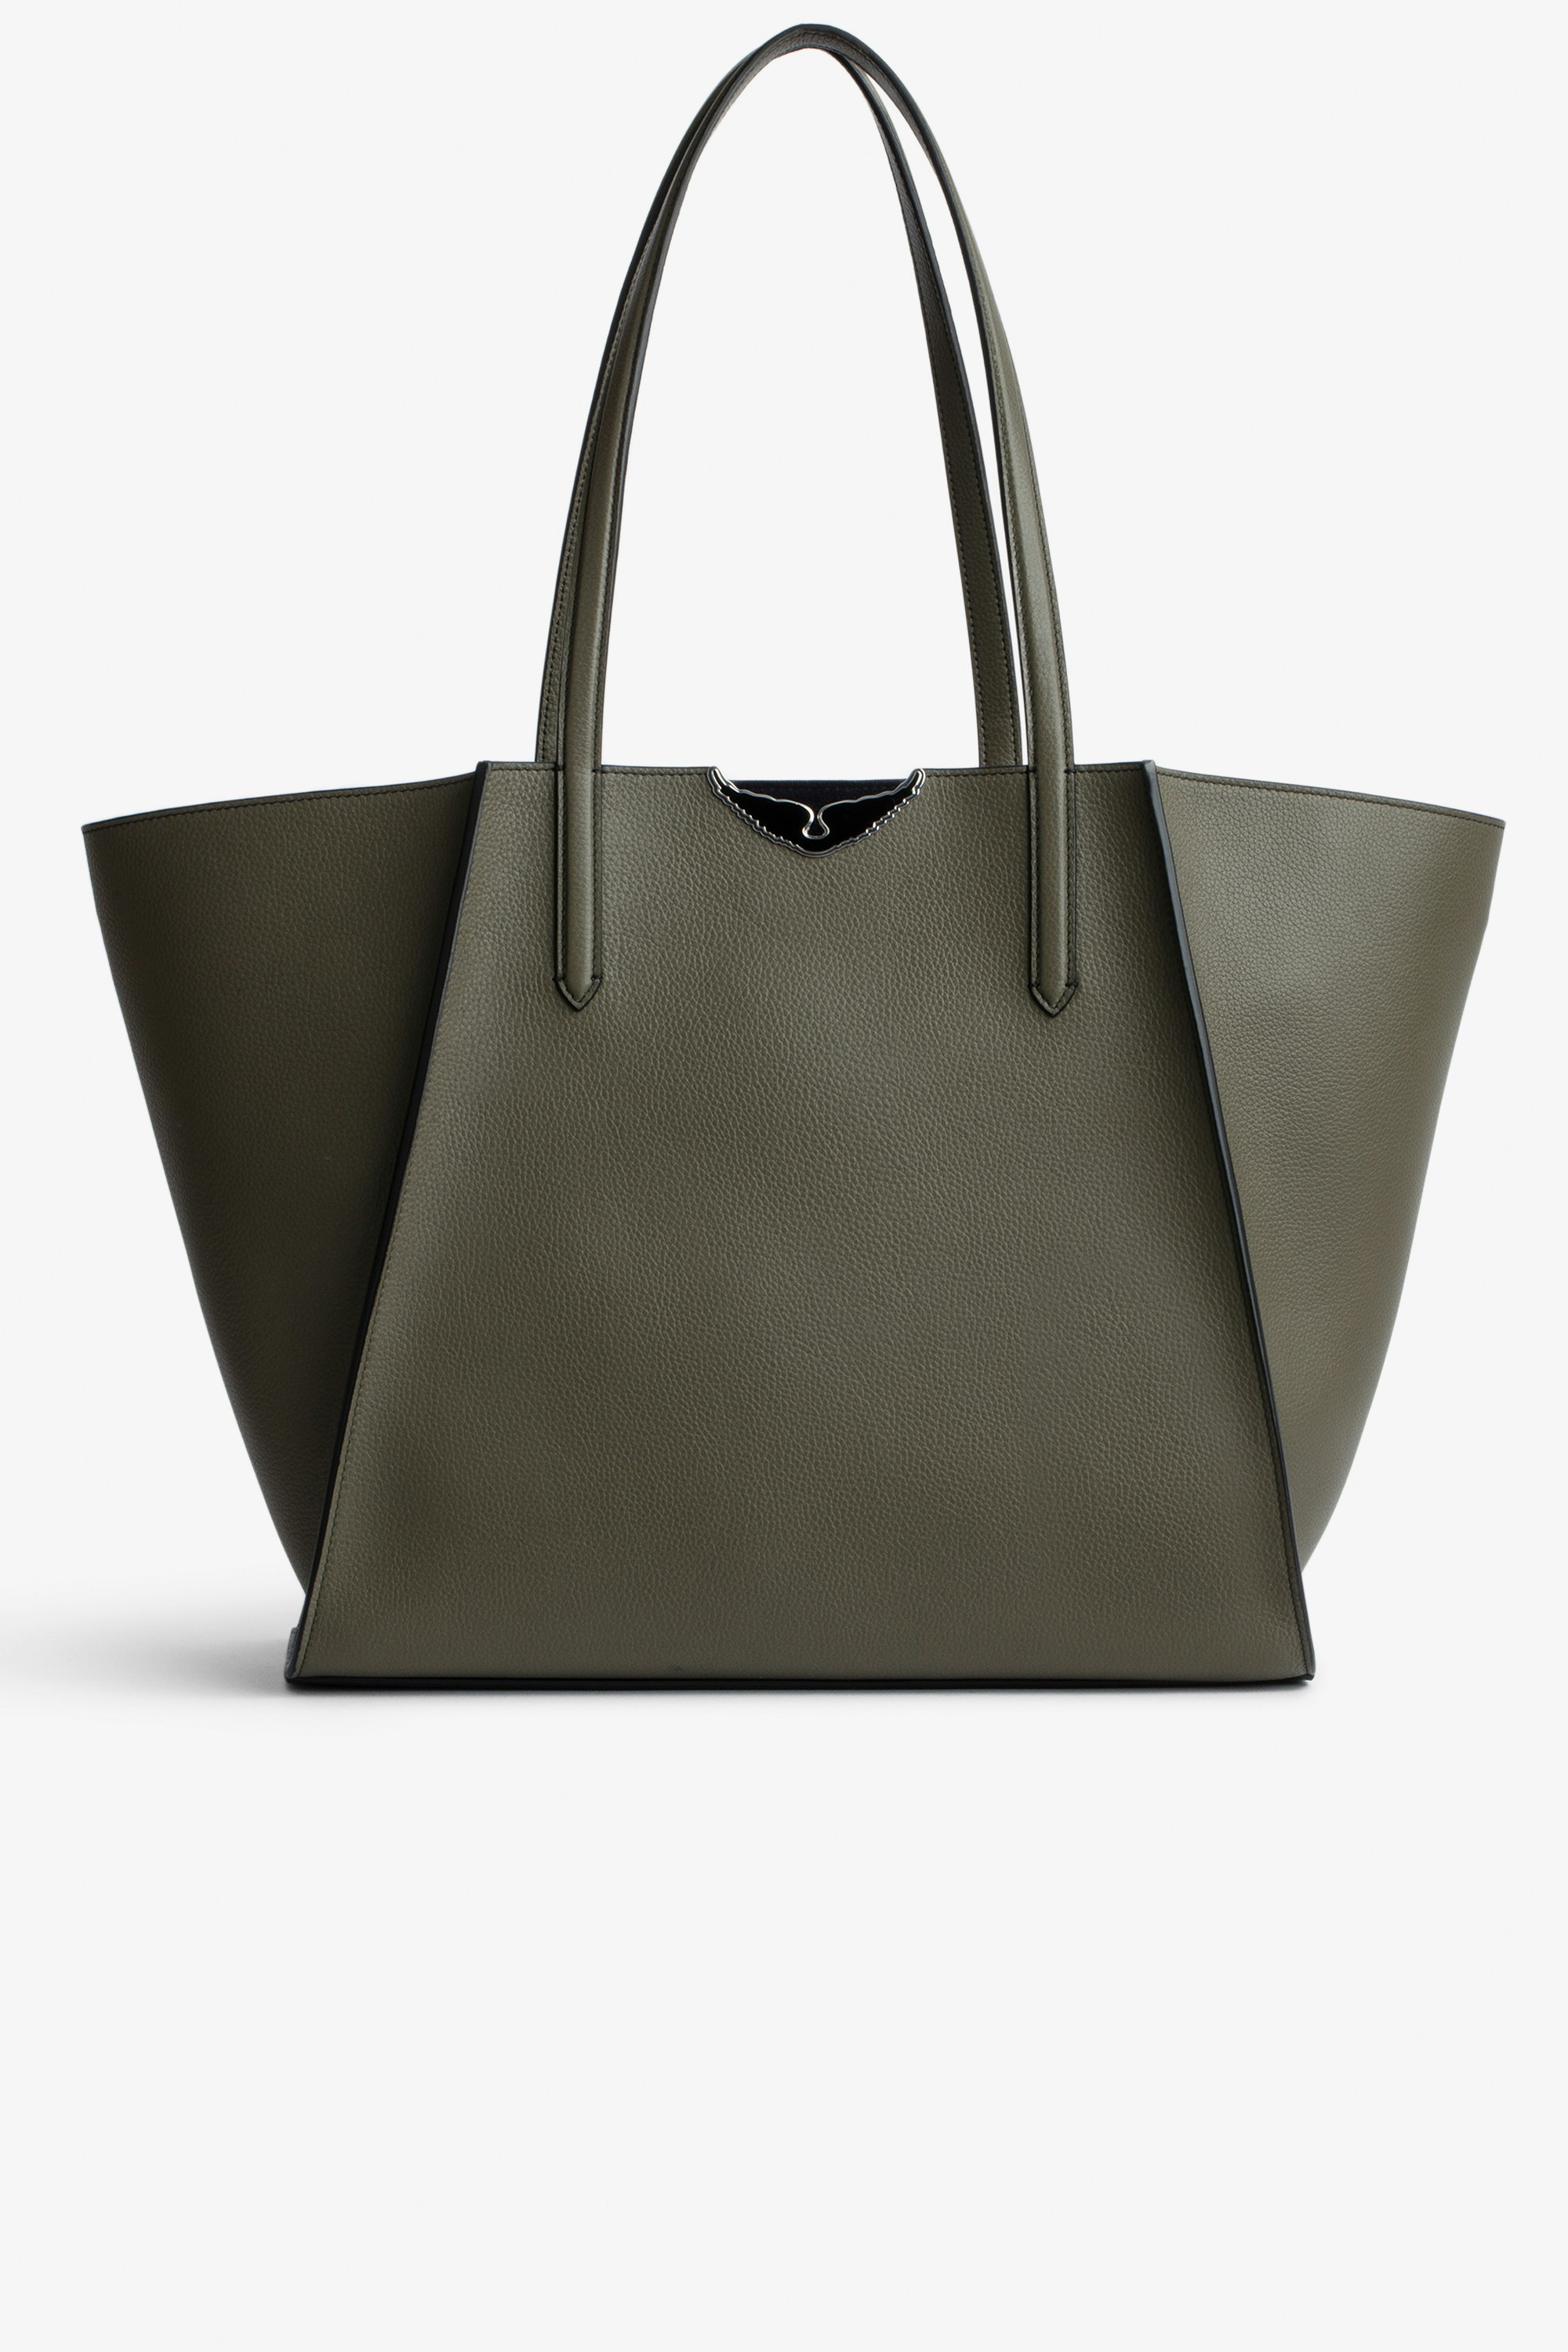 Le Borderline Bag - Women's tote bag in khaki grained leather and navy-blue suede with black lacquered wings